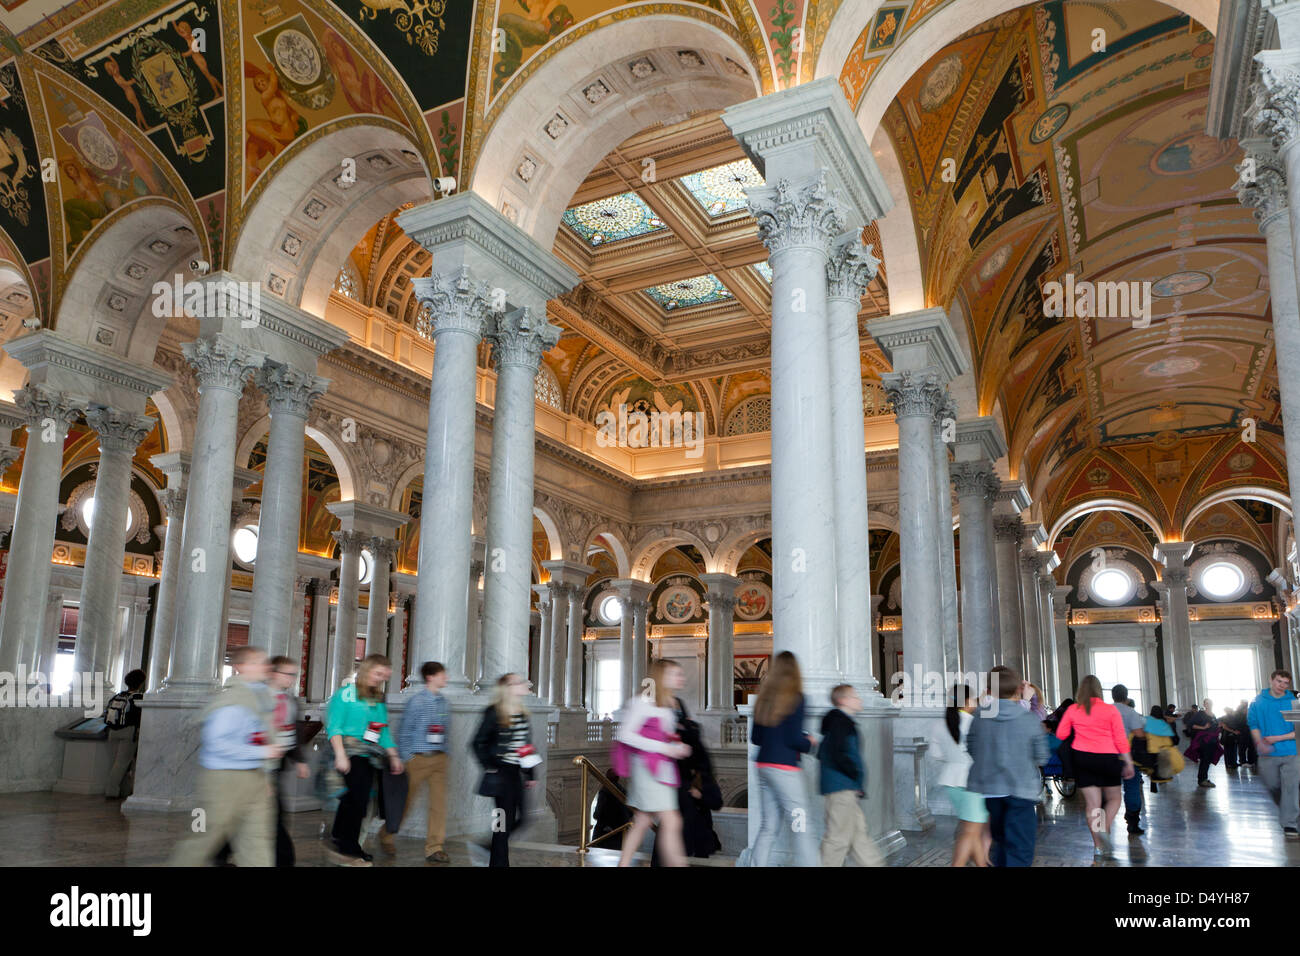 US Library of Congress building interior Stock Photo